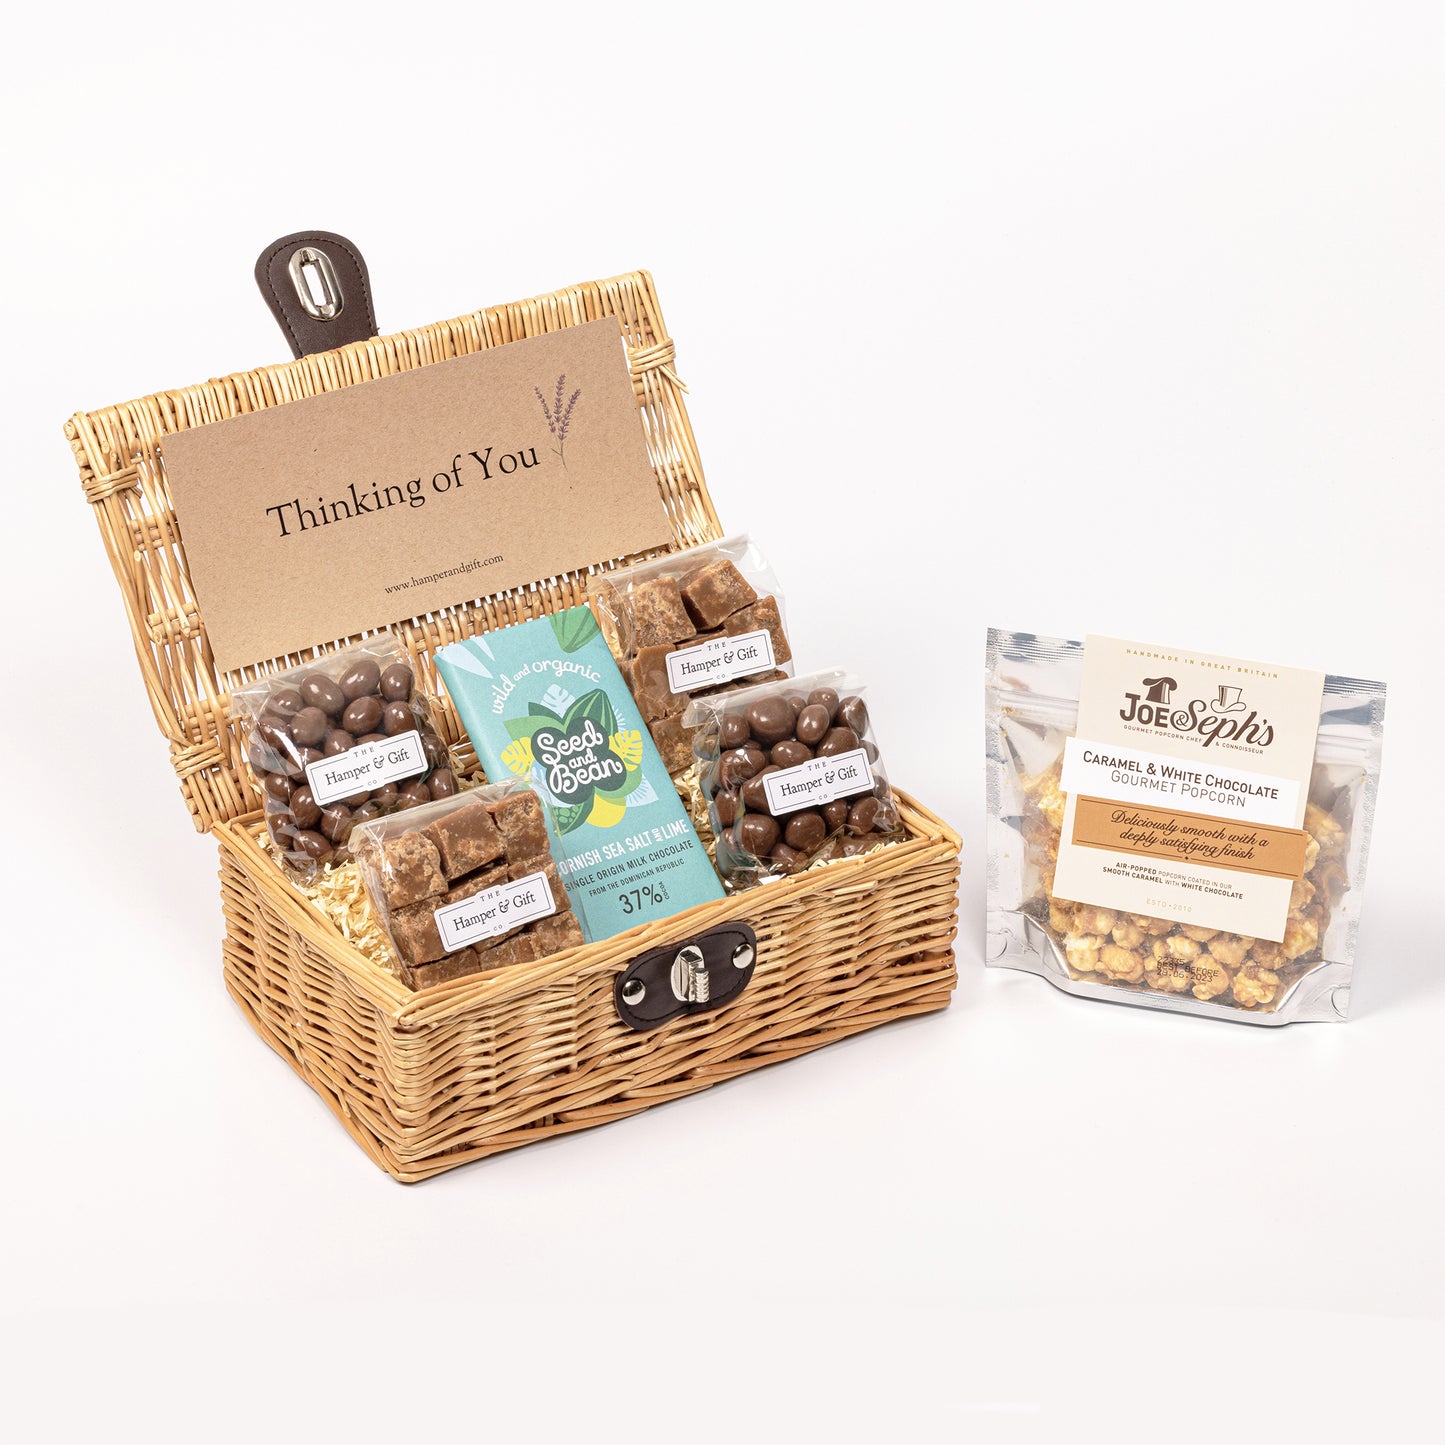 Thinking of You Hamper filled with chocolate, fudge and gourmet popcorn